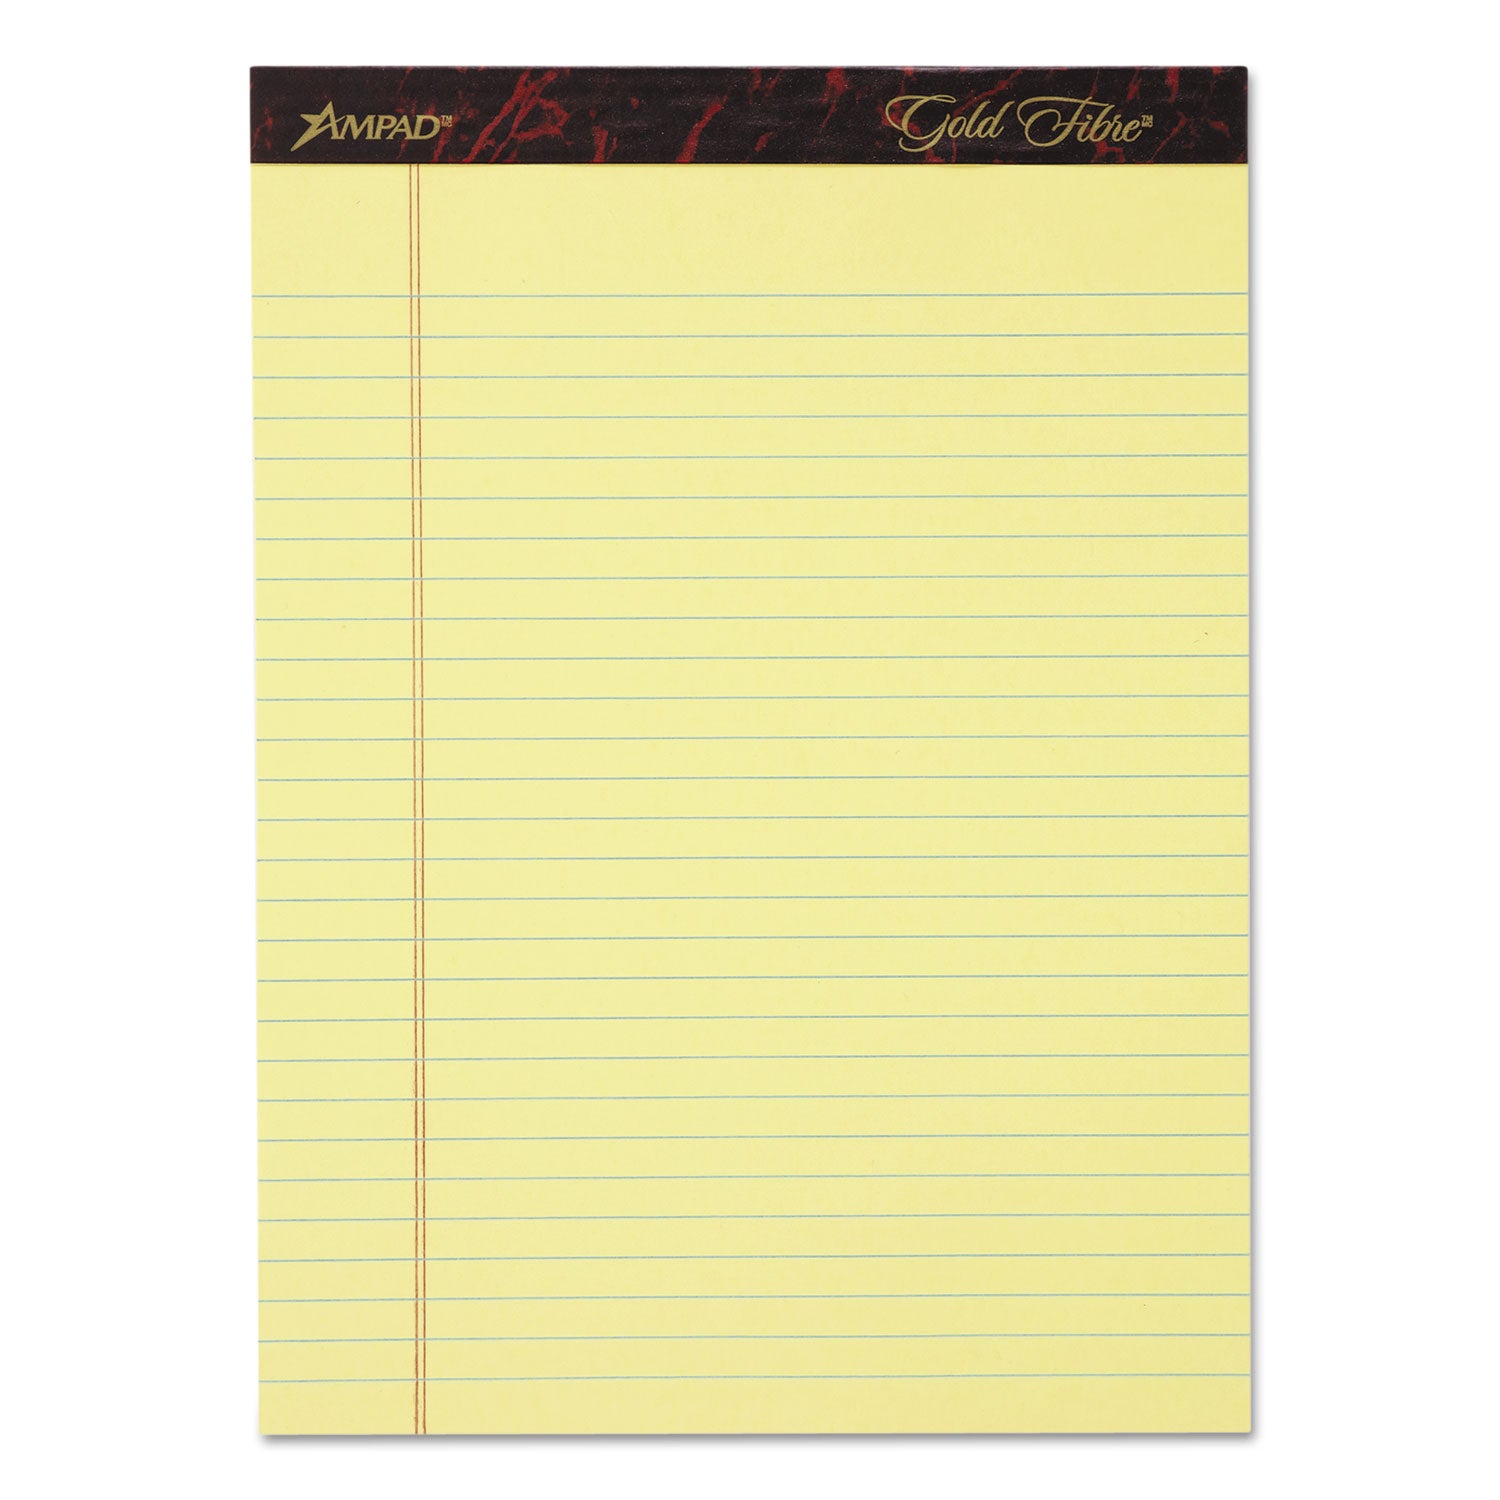 Gold Fibre Writing Pads, Wide/Legal Rule, 50 Canary-Yellow 8.5 x 11.75 Sheets, 4/Pack - 